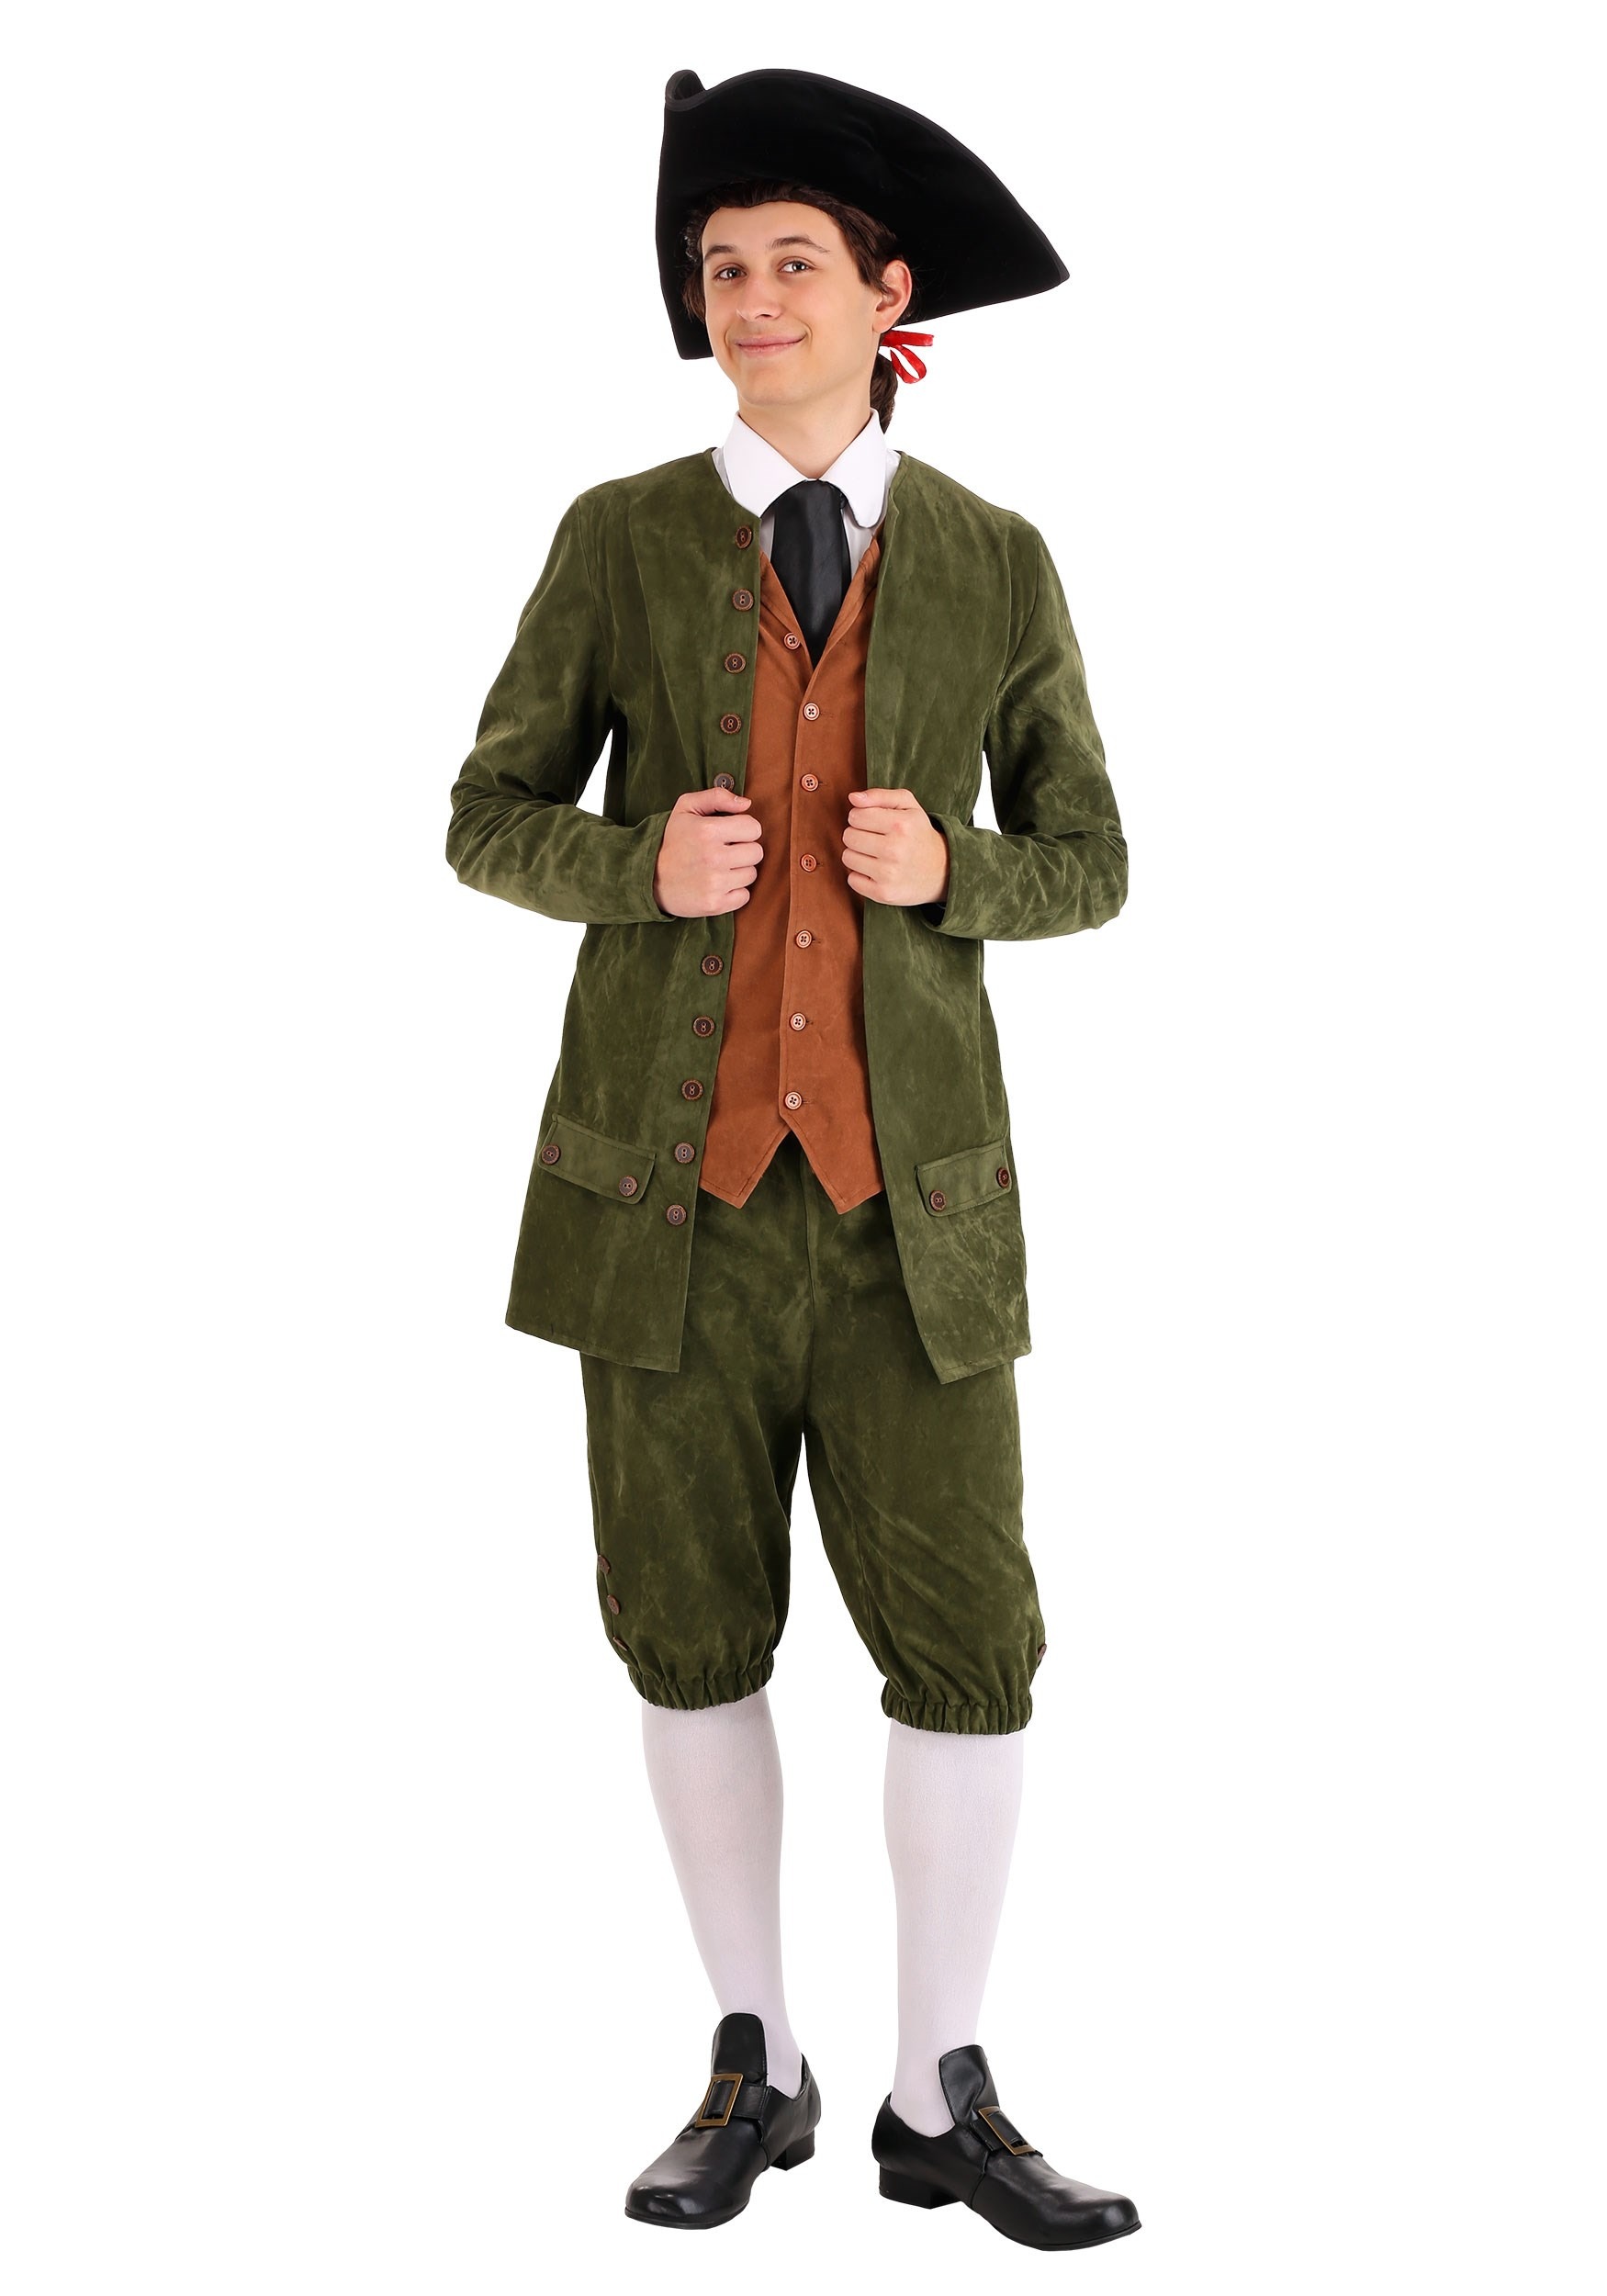 https://images.halloweencostumes.ca/products/64012/1-1/adult-colonial-costume1.jpg